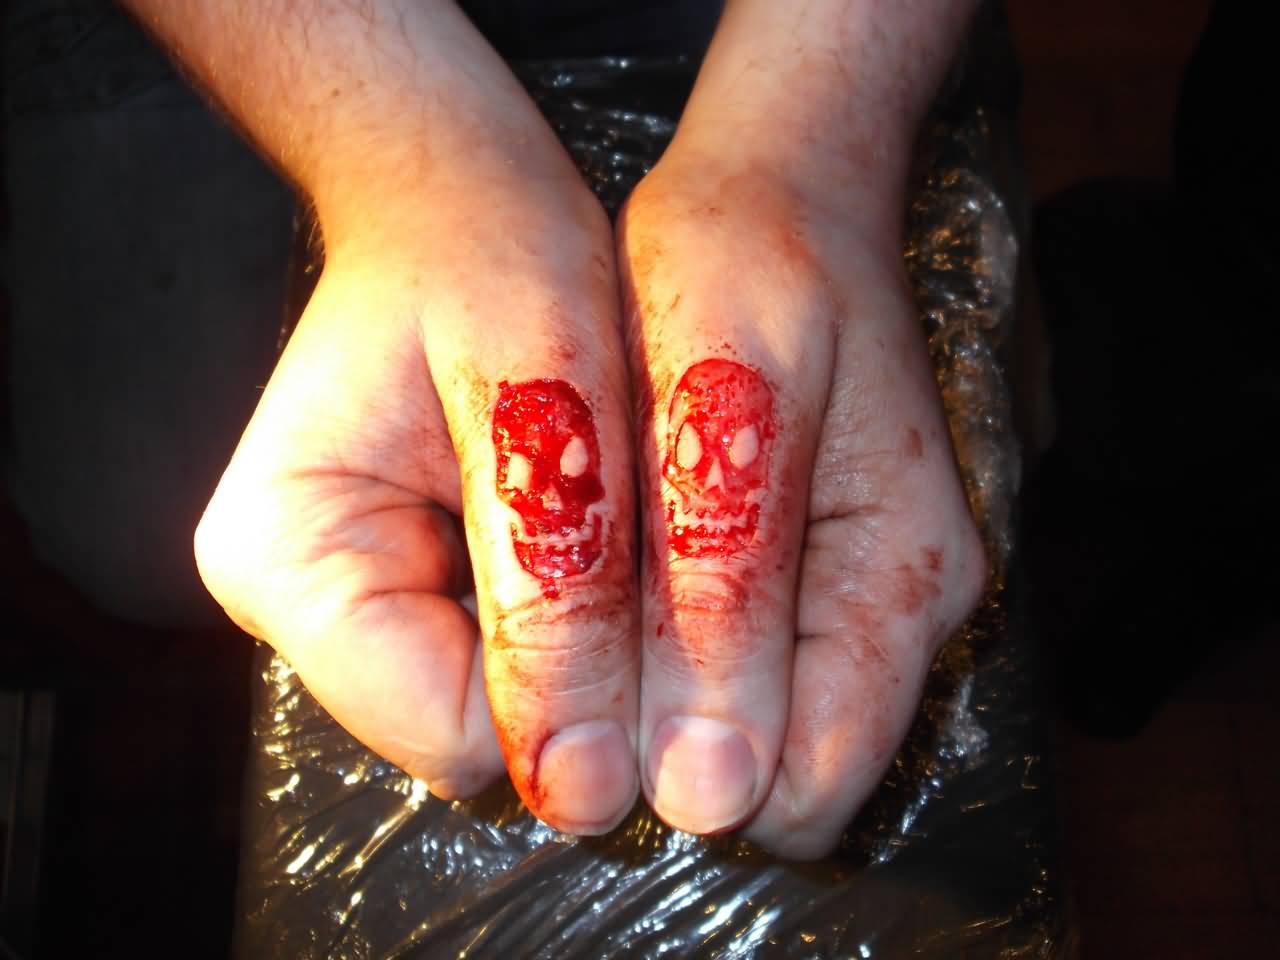 Skull Scarification Matching Tattoos On Both Thumbs By Luke Stabby Lley